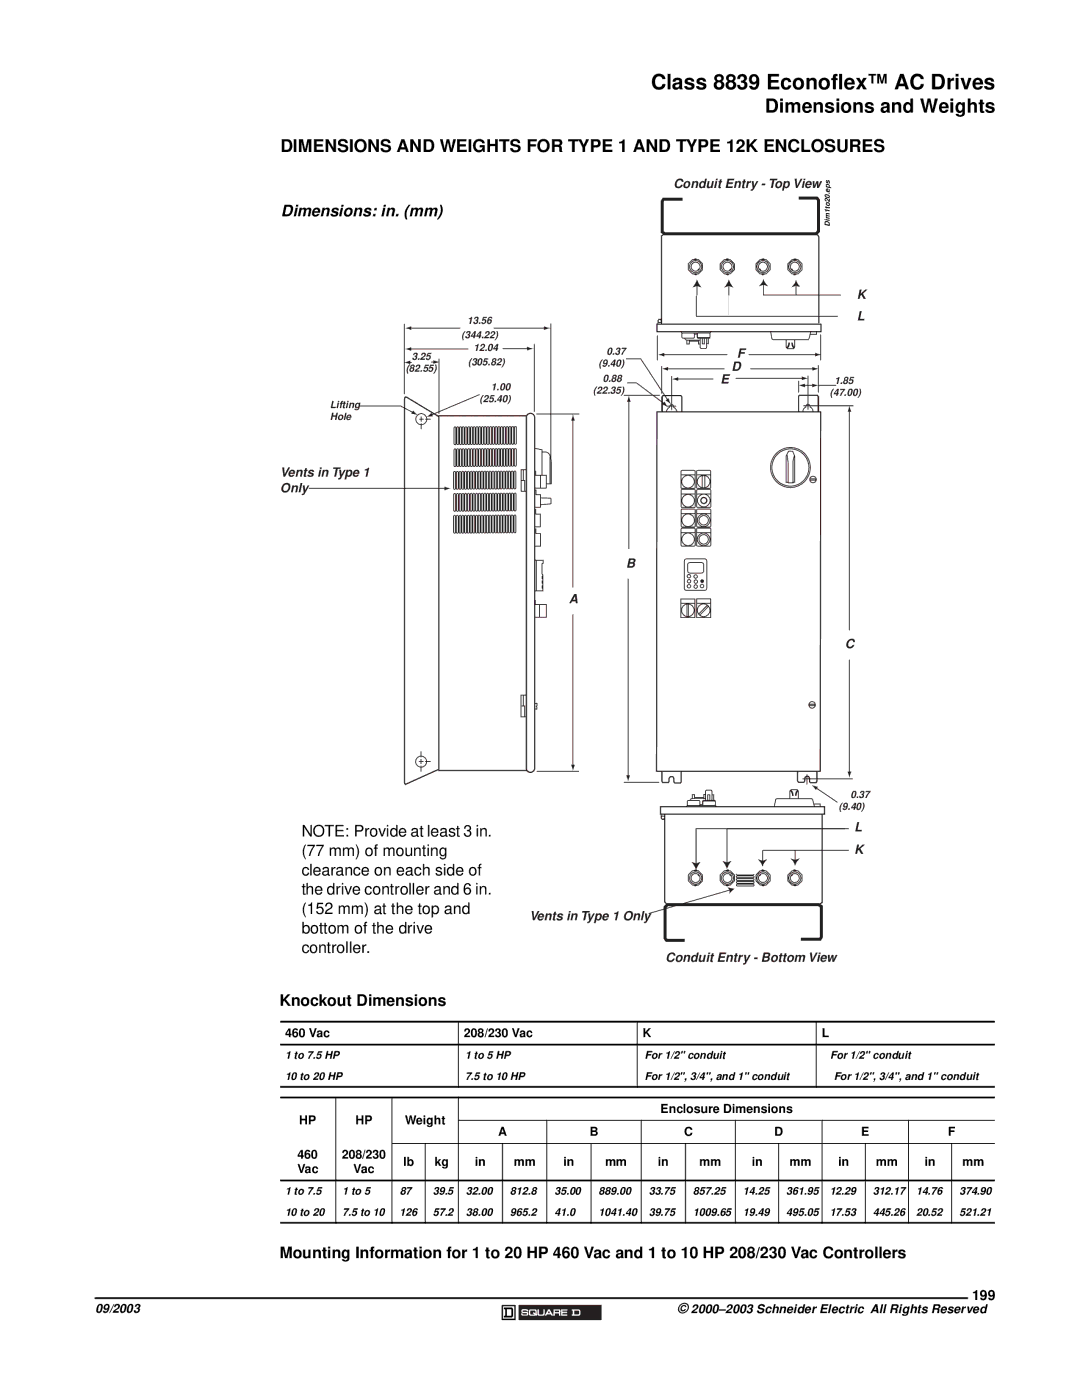 Schneider Electric 58 TRX manual Dimensions and Weights for Type 1 and Type 12K Enclosures, 199, Vac 208/230 Vac 